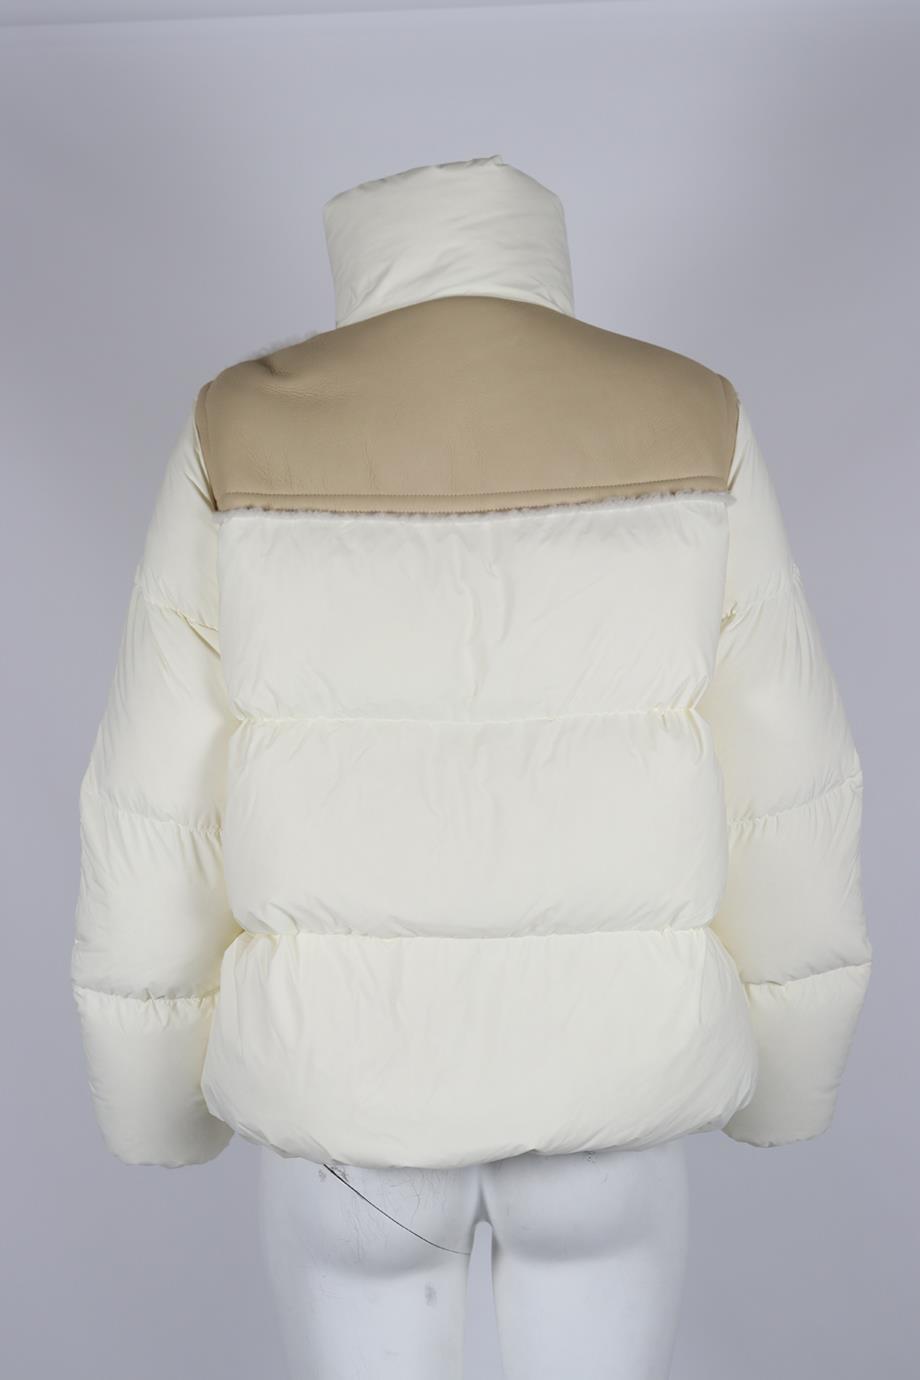 MONCLER SHEARLING TRIMMED QUILTED SHELL DOWN JACKET UK 8